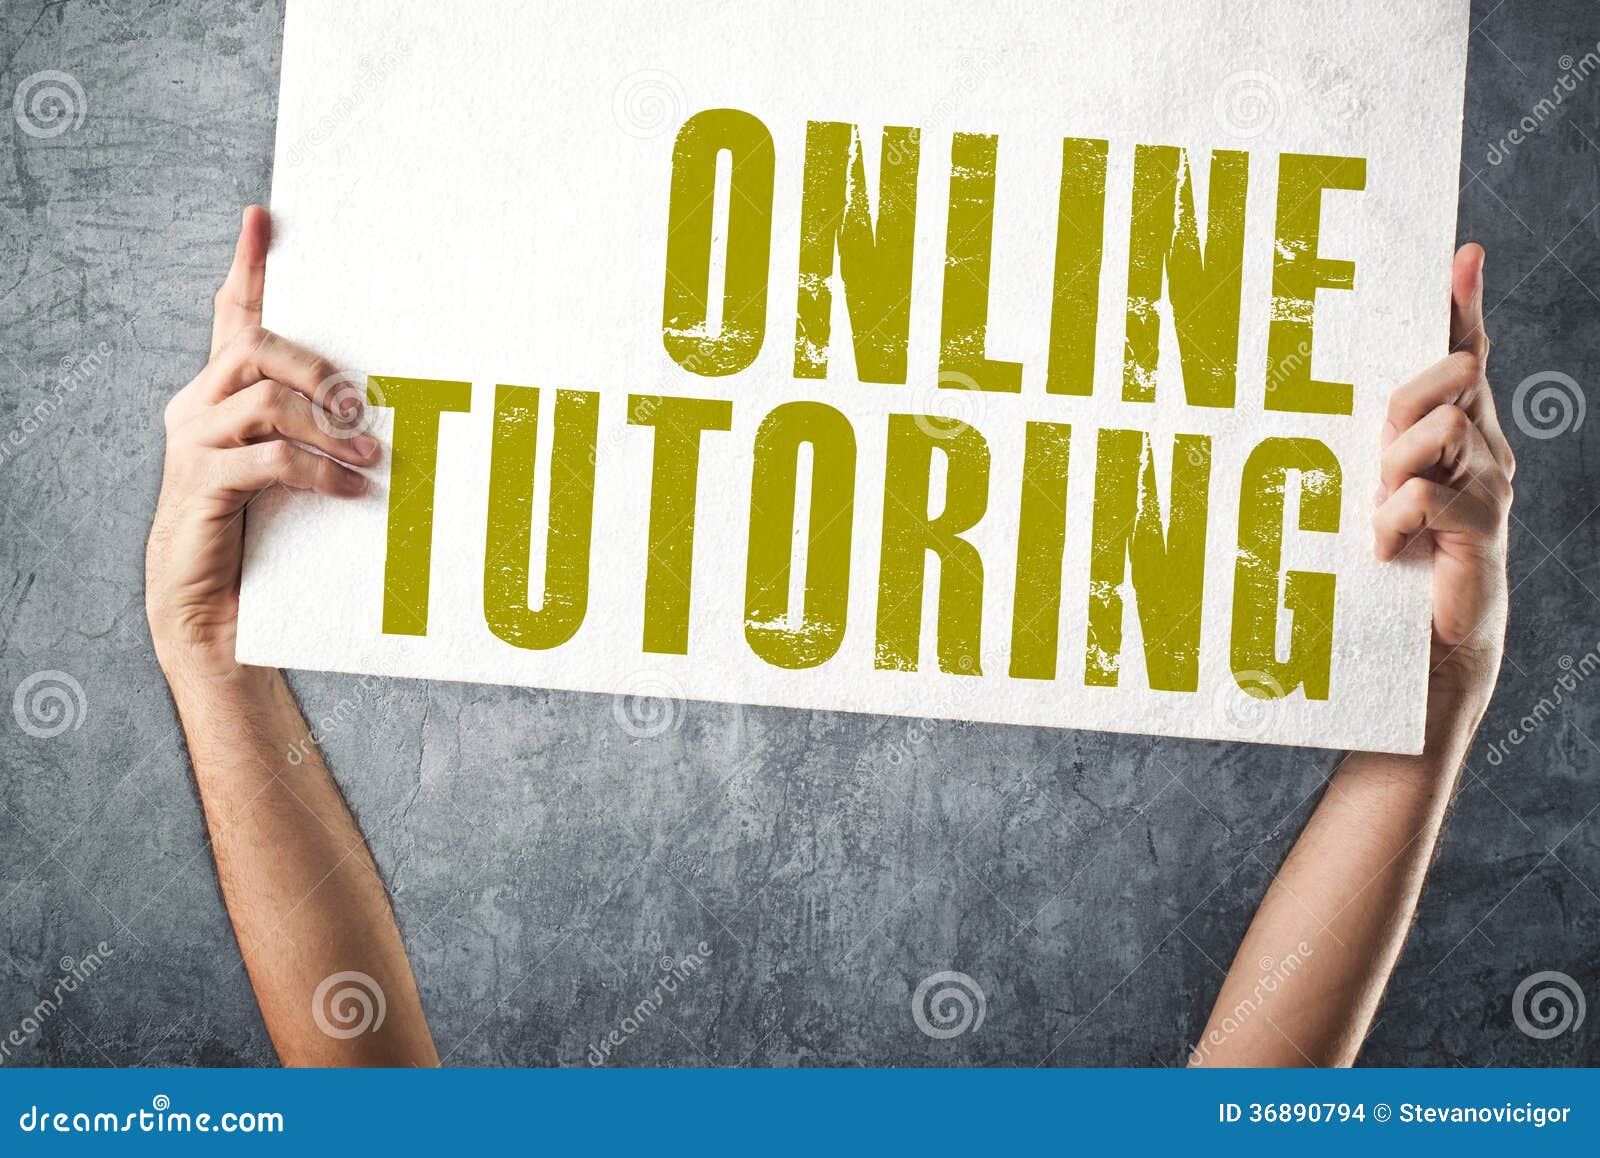 man holding banner with online tutoring title